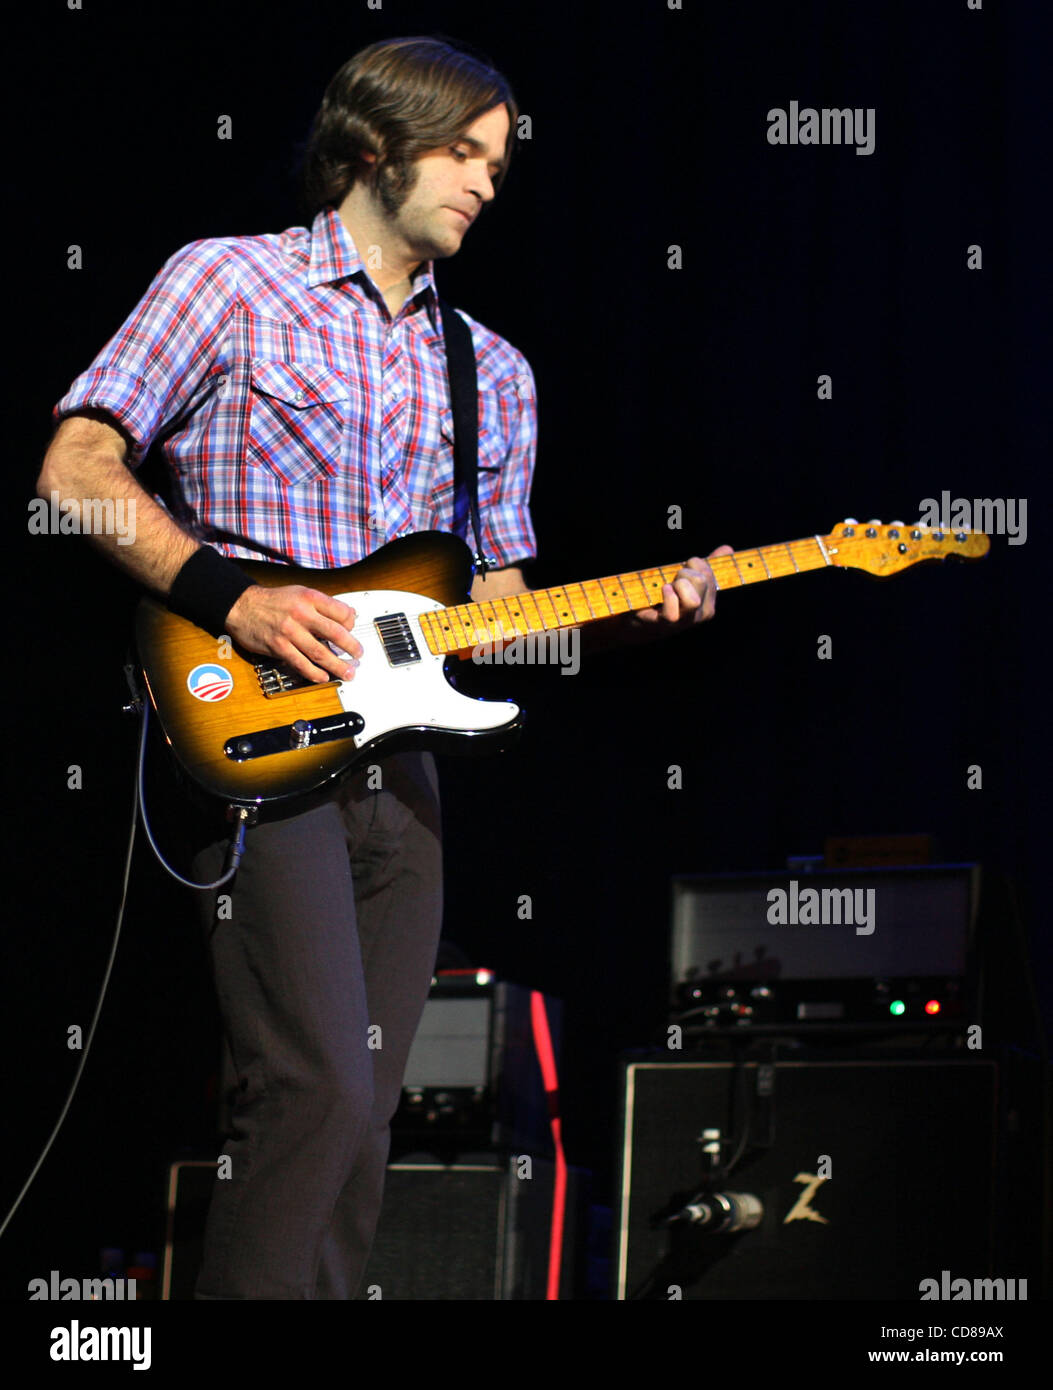 Oct 06, 2008 - Atlantic City, New Jersey, USA - Guitarist BEN GIBBARD of Death Cab for Cutie performs at the House of Blues Atlantic City on Sunday Night October 6, 2008 in Atlantic City, New Jersey. (Credit Image: © Tom Briglia/ZUMA Press) Stock Photo